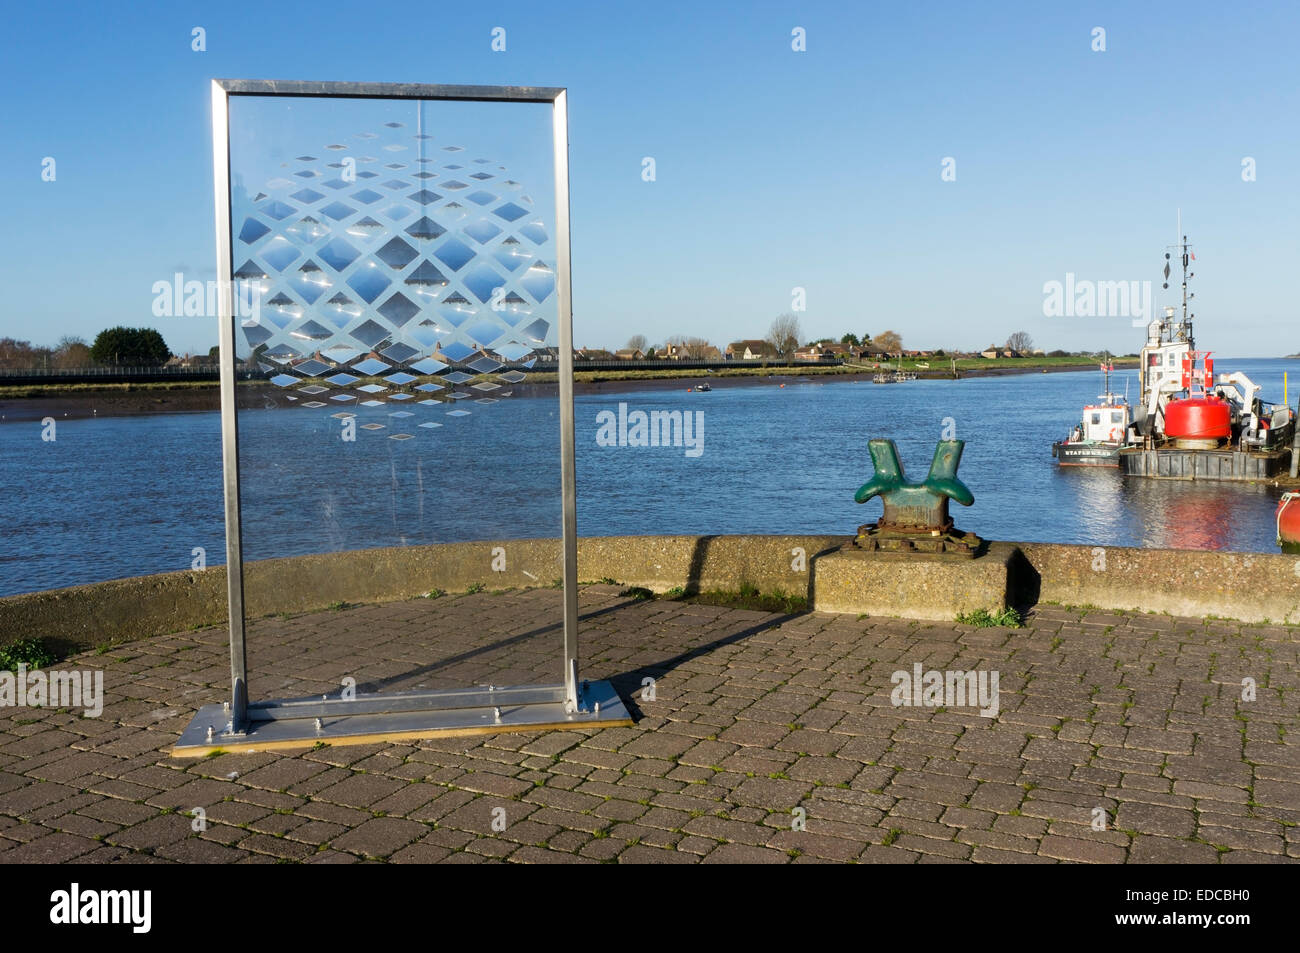 Archilense by Thibault Zambeaux is a part of the Art Cities & Landscape project in King's Lynn, Norfolk. Stock Photo